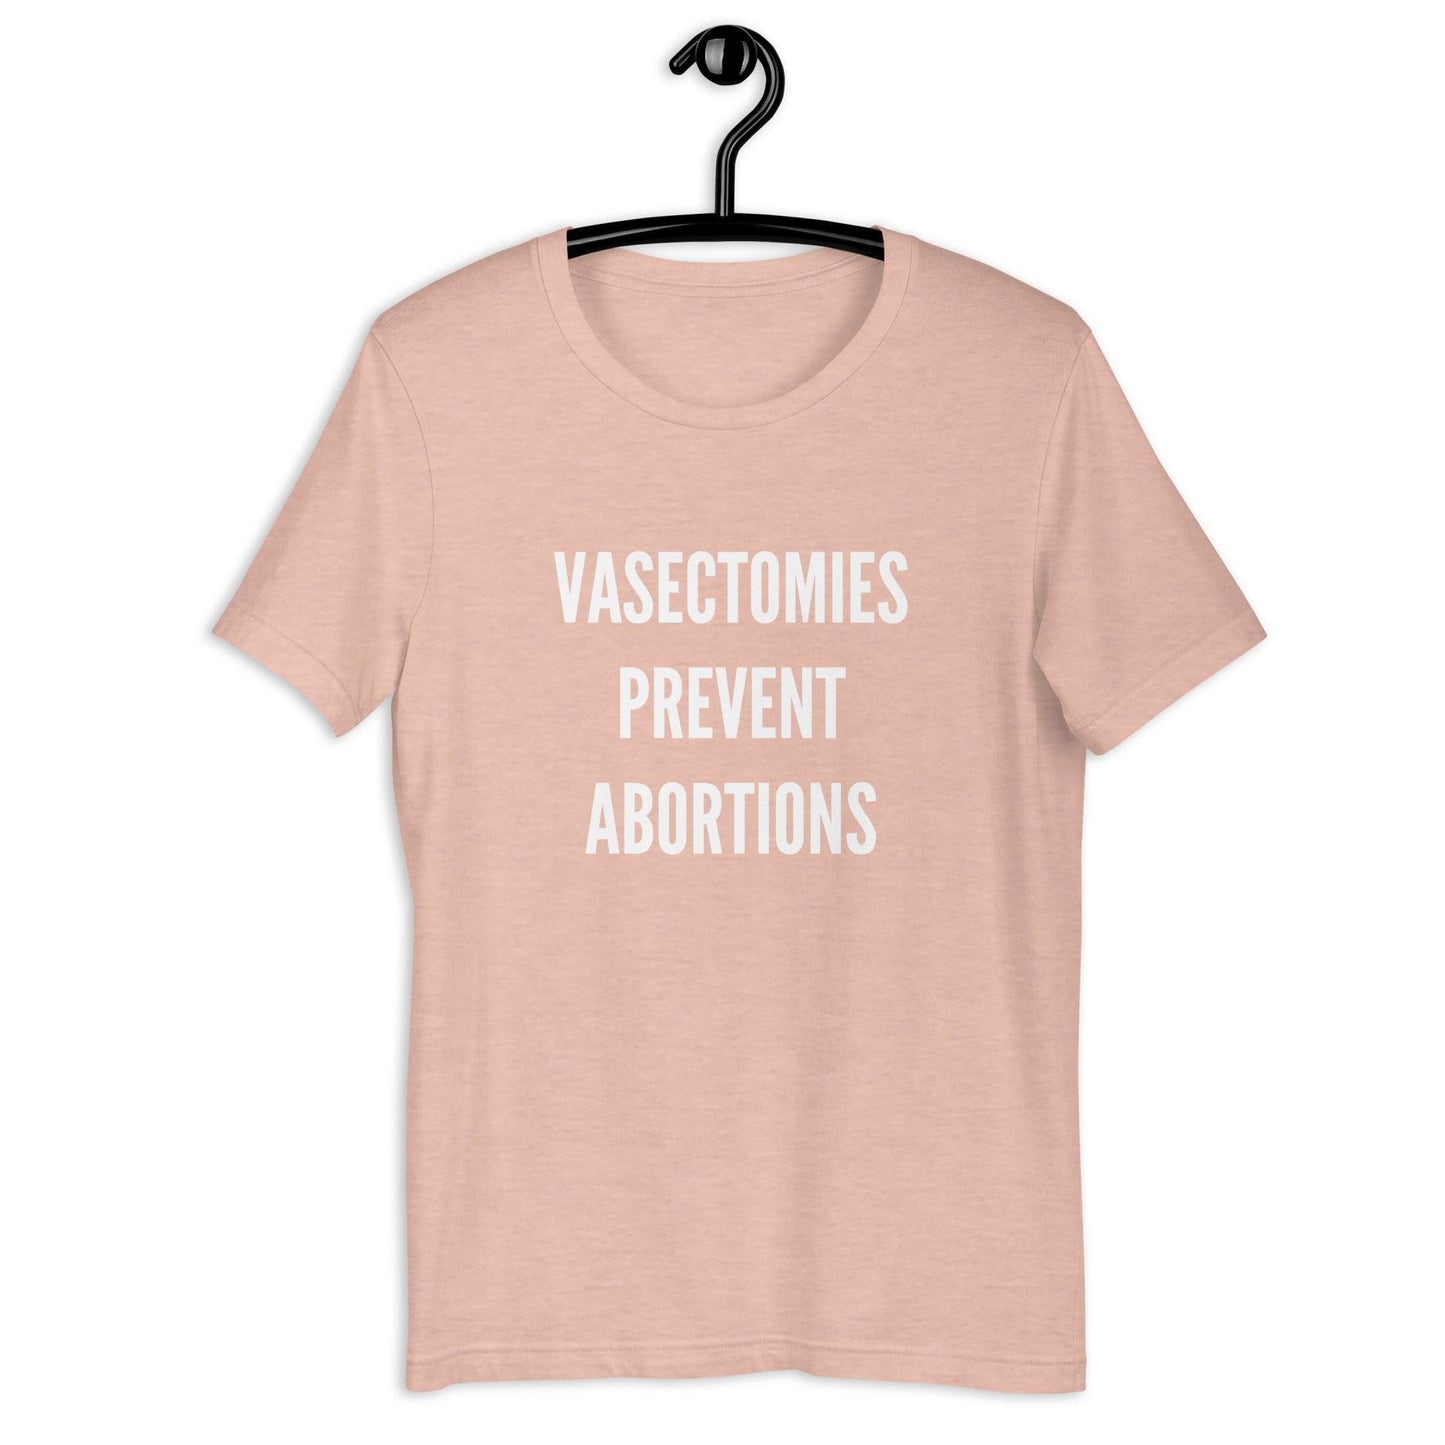 Vasectomies Prevent Abortions Unisex Eco-Friendly Shirt-Tees-Crimson and Clover Studio